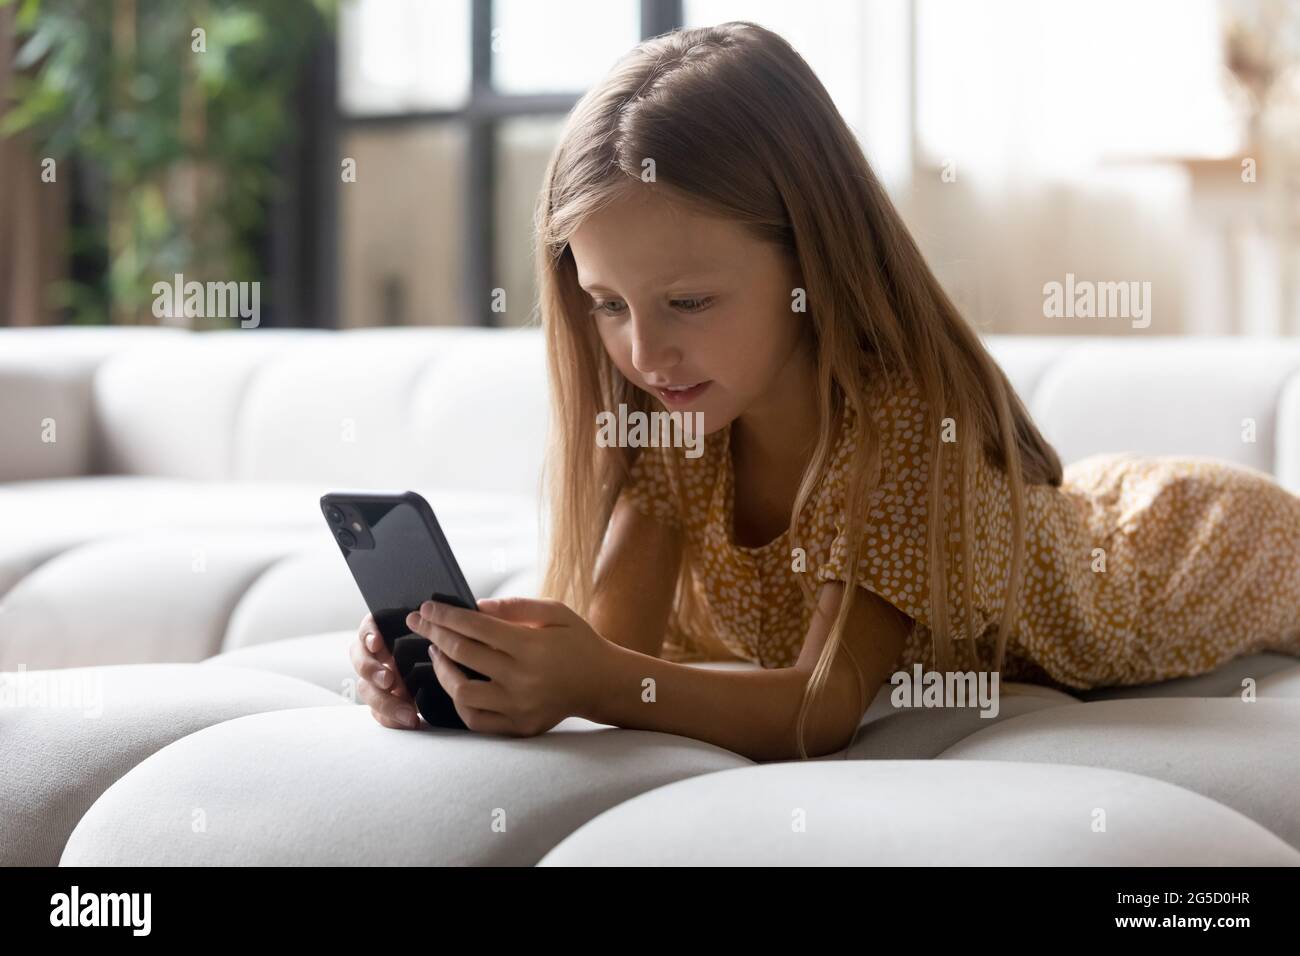 Addicted to modern tech small girl playing mobile games. Stock Photo